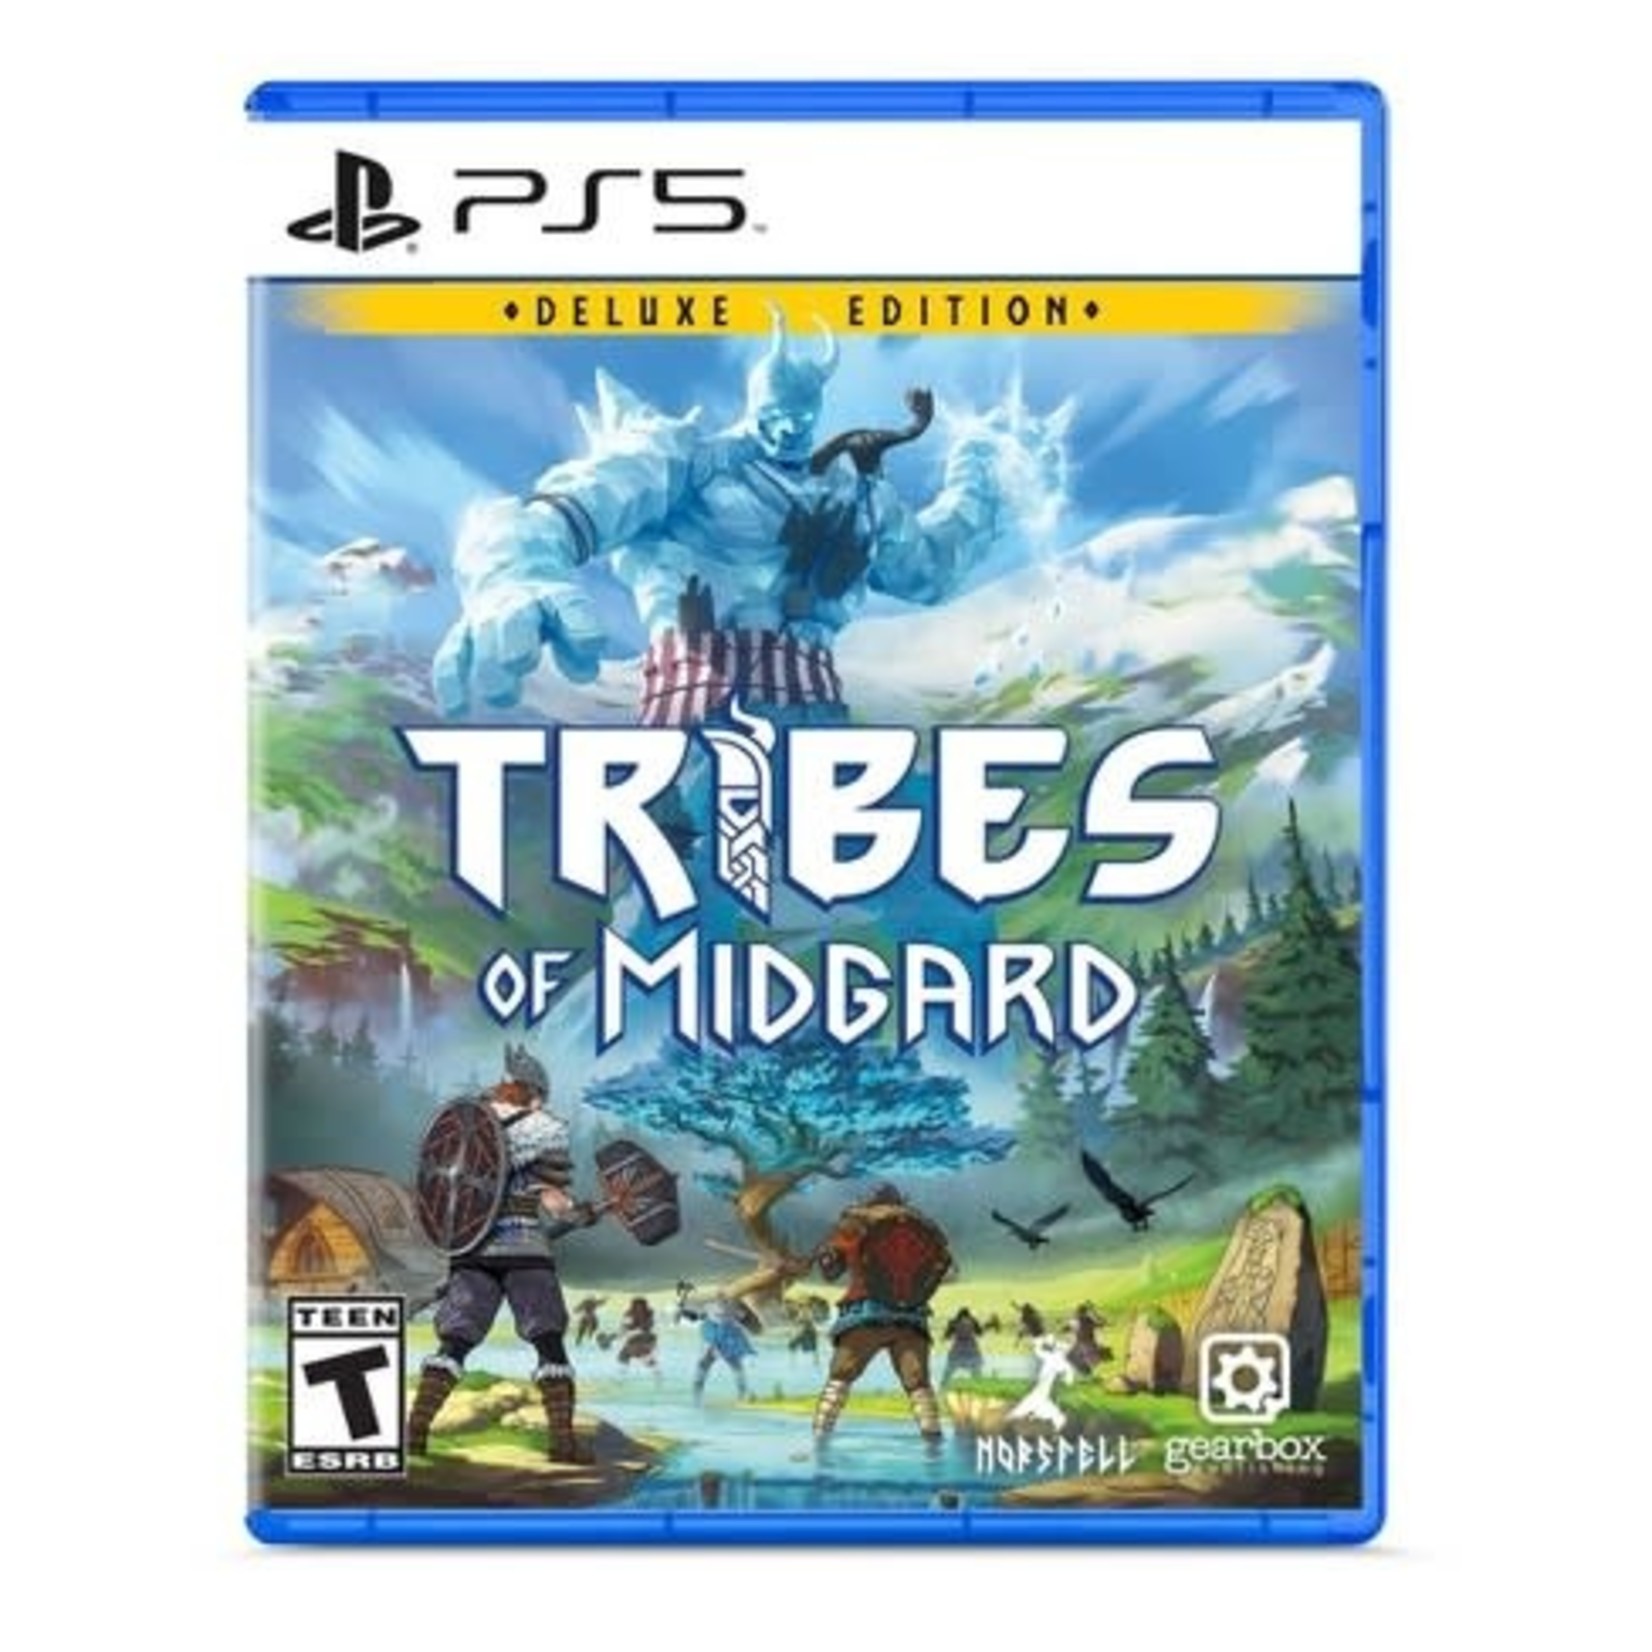 PS5-Tribes of Midgard: Deluxe Edition